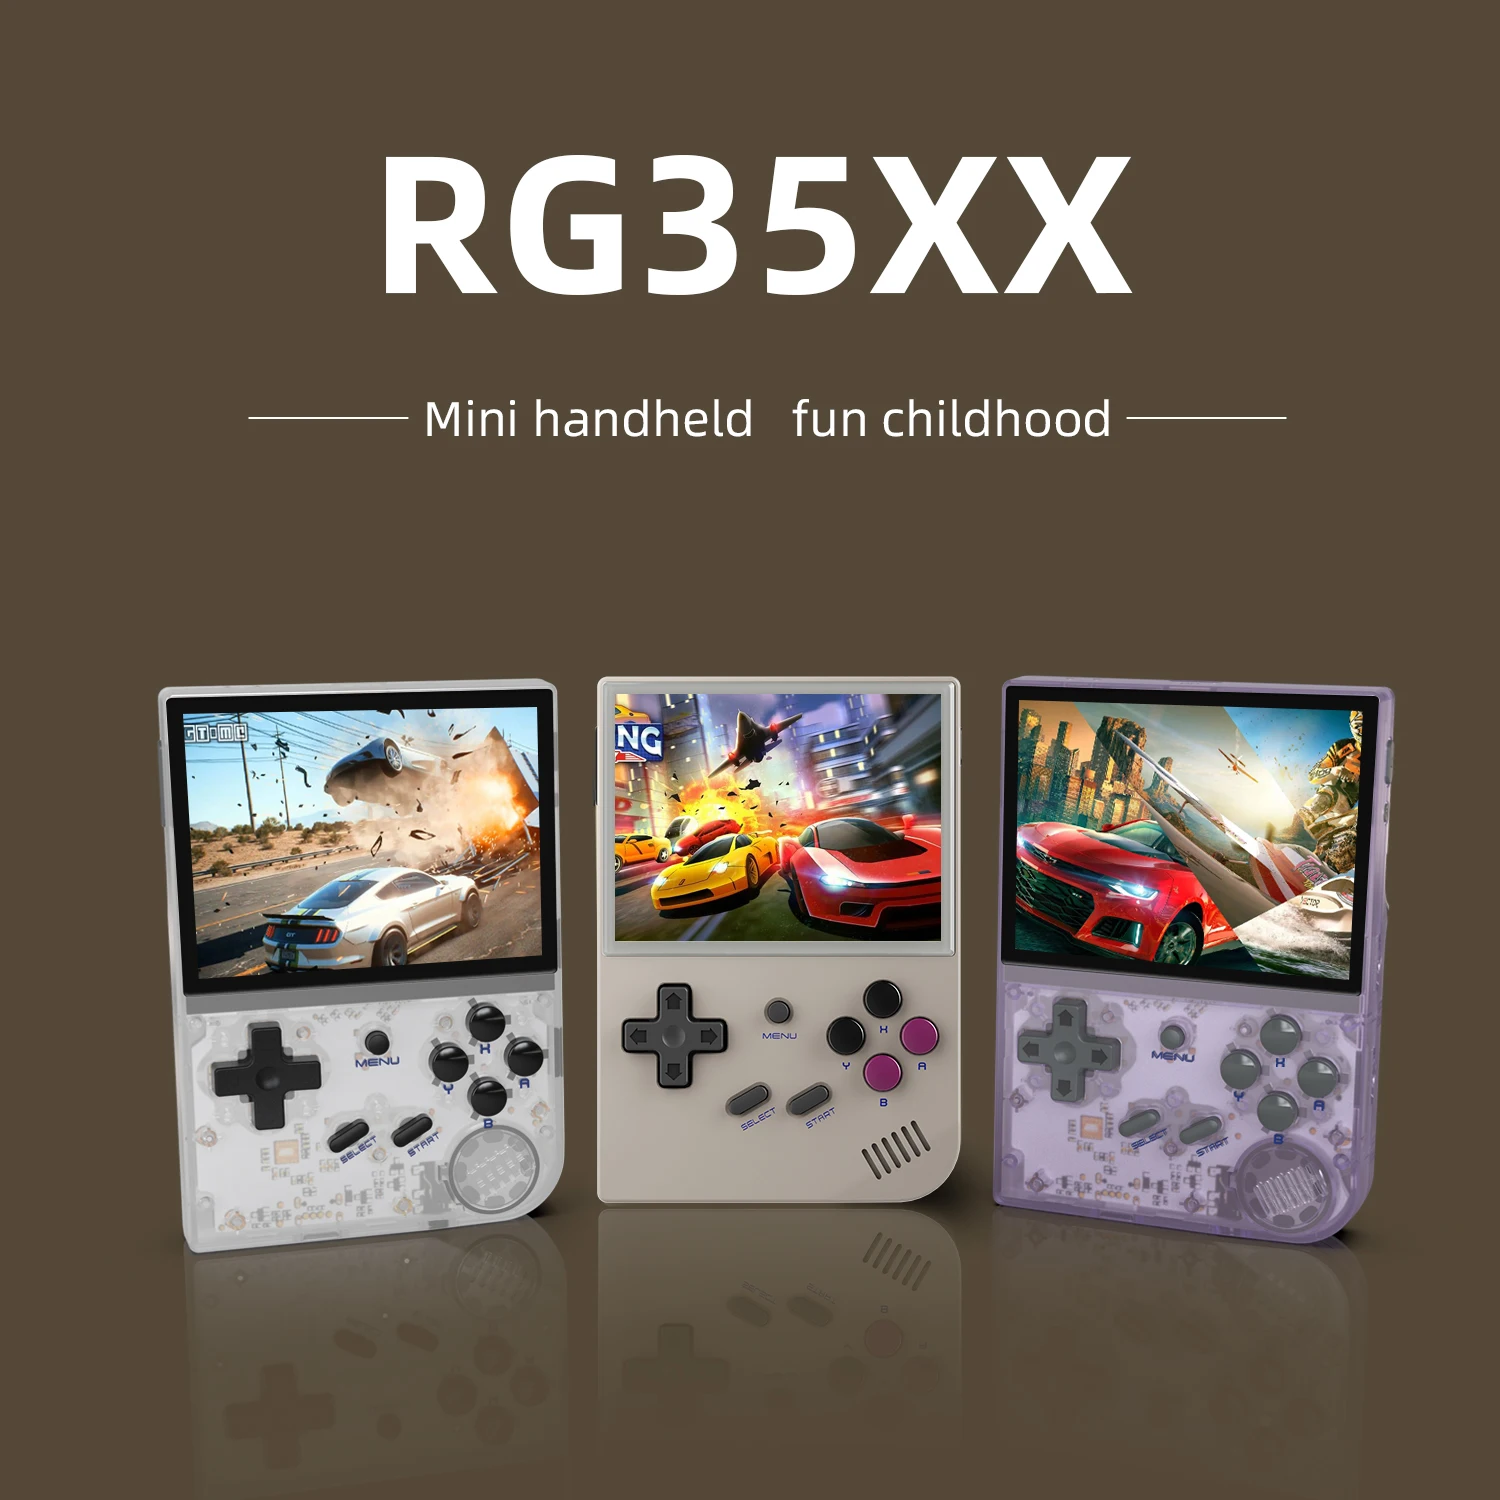 

ANBERNIC RG35XX Video Game Console Mini Retro 3.5 Inch IPS Screen Handheld Game Console Linux System Arcade PS1 PSP Game Player